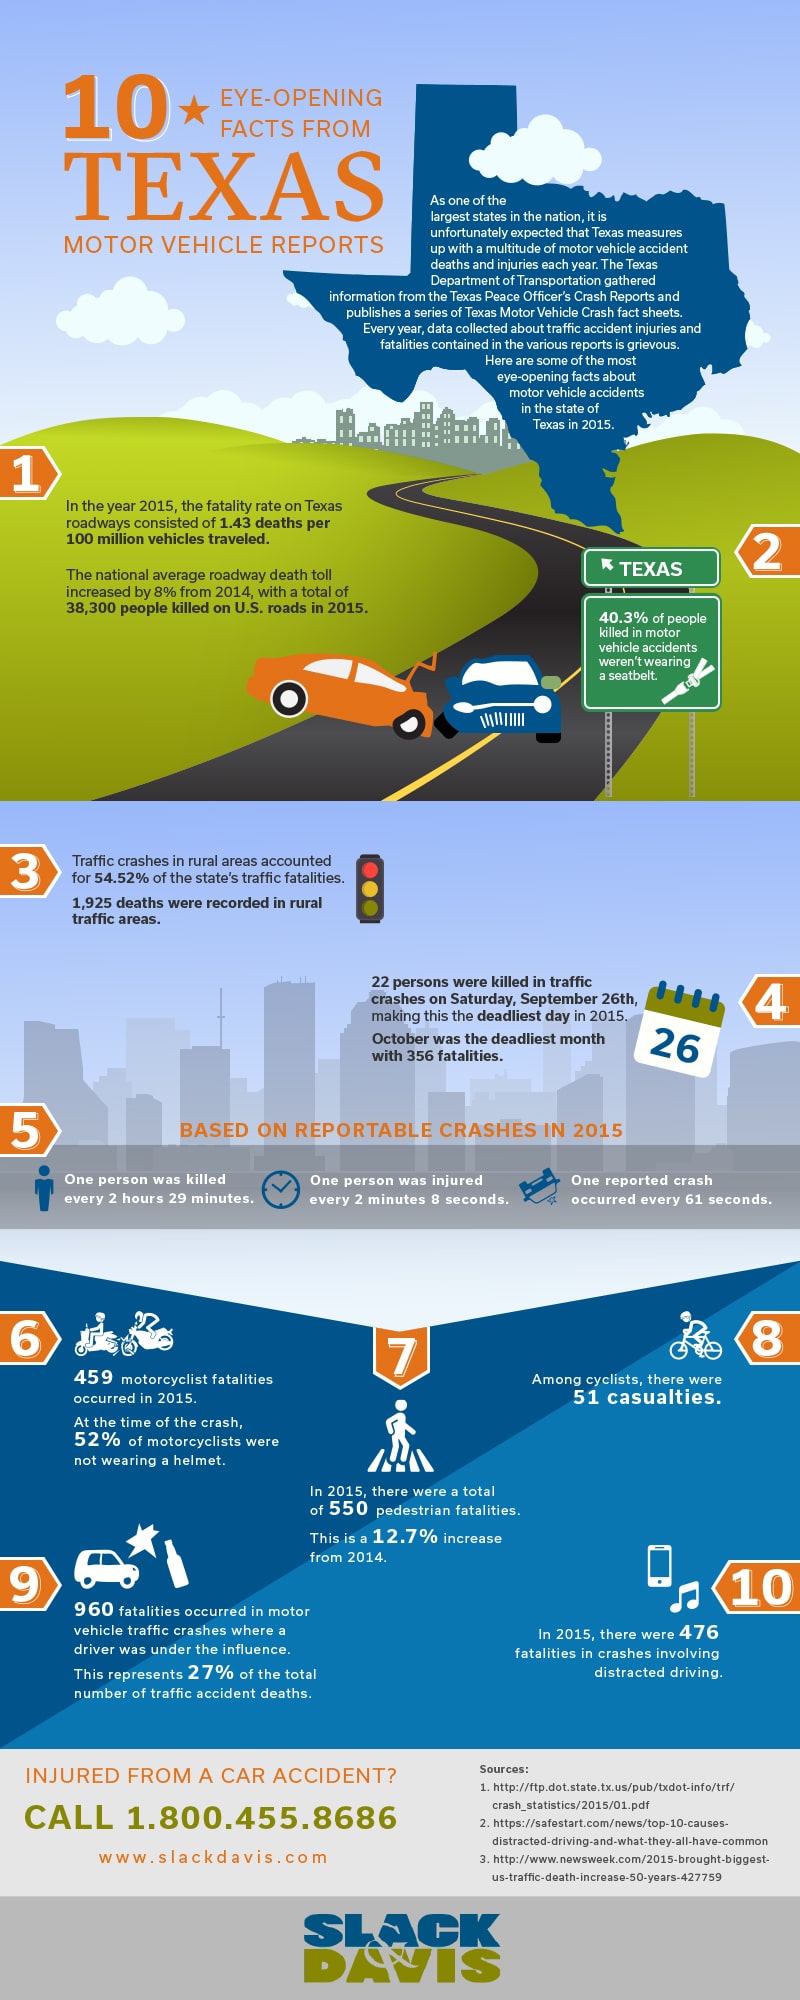 10 Eye-Opening Facts From Texas Motor Vehicle Reports